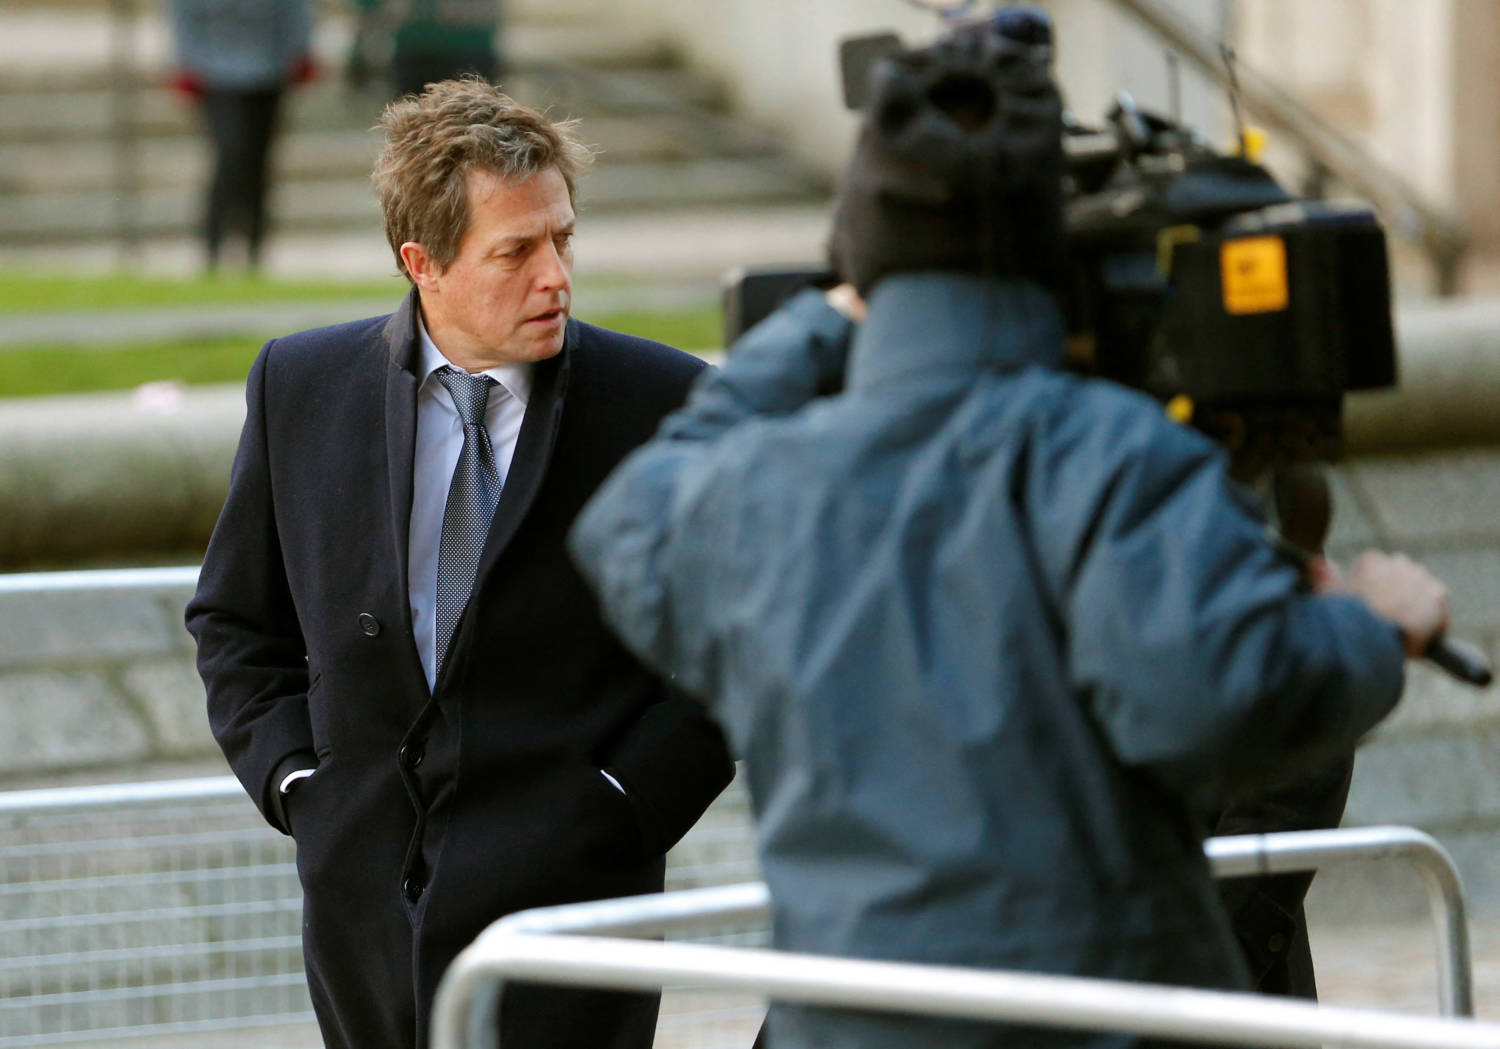 File Photo: Actor Hugh Grant, A High Profile Campaigner On Press Intrusion, Arrives To Attend The Release Of Lord Justice Brian Leveson Report On Media Practices In Central London